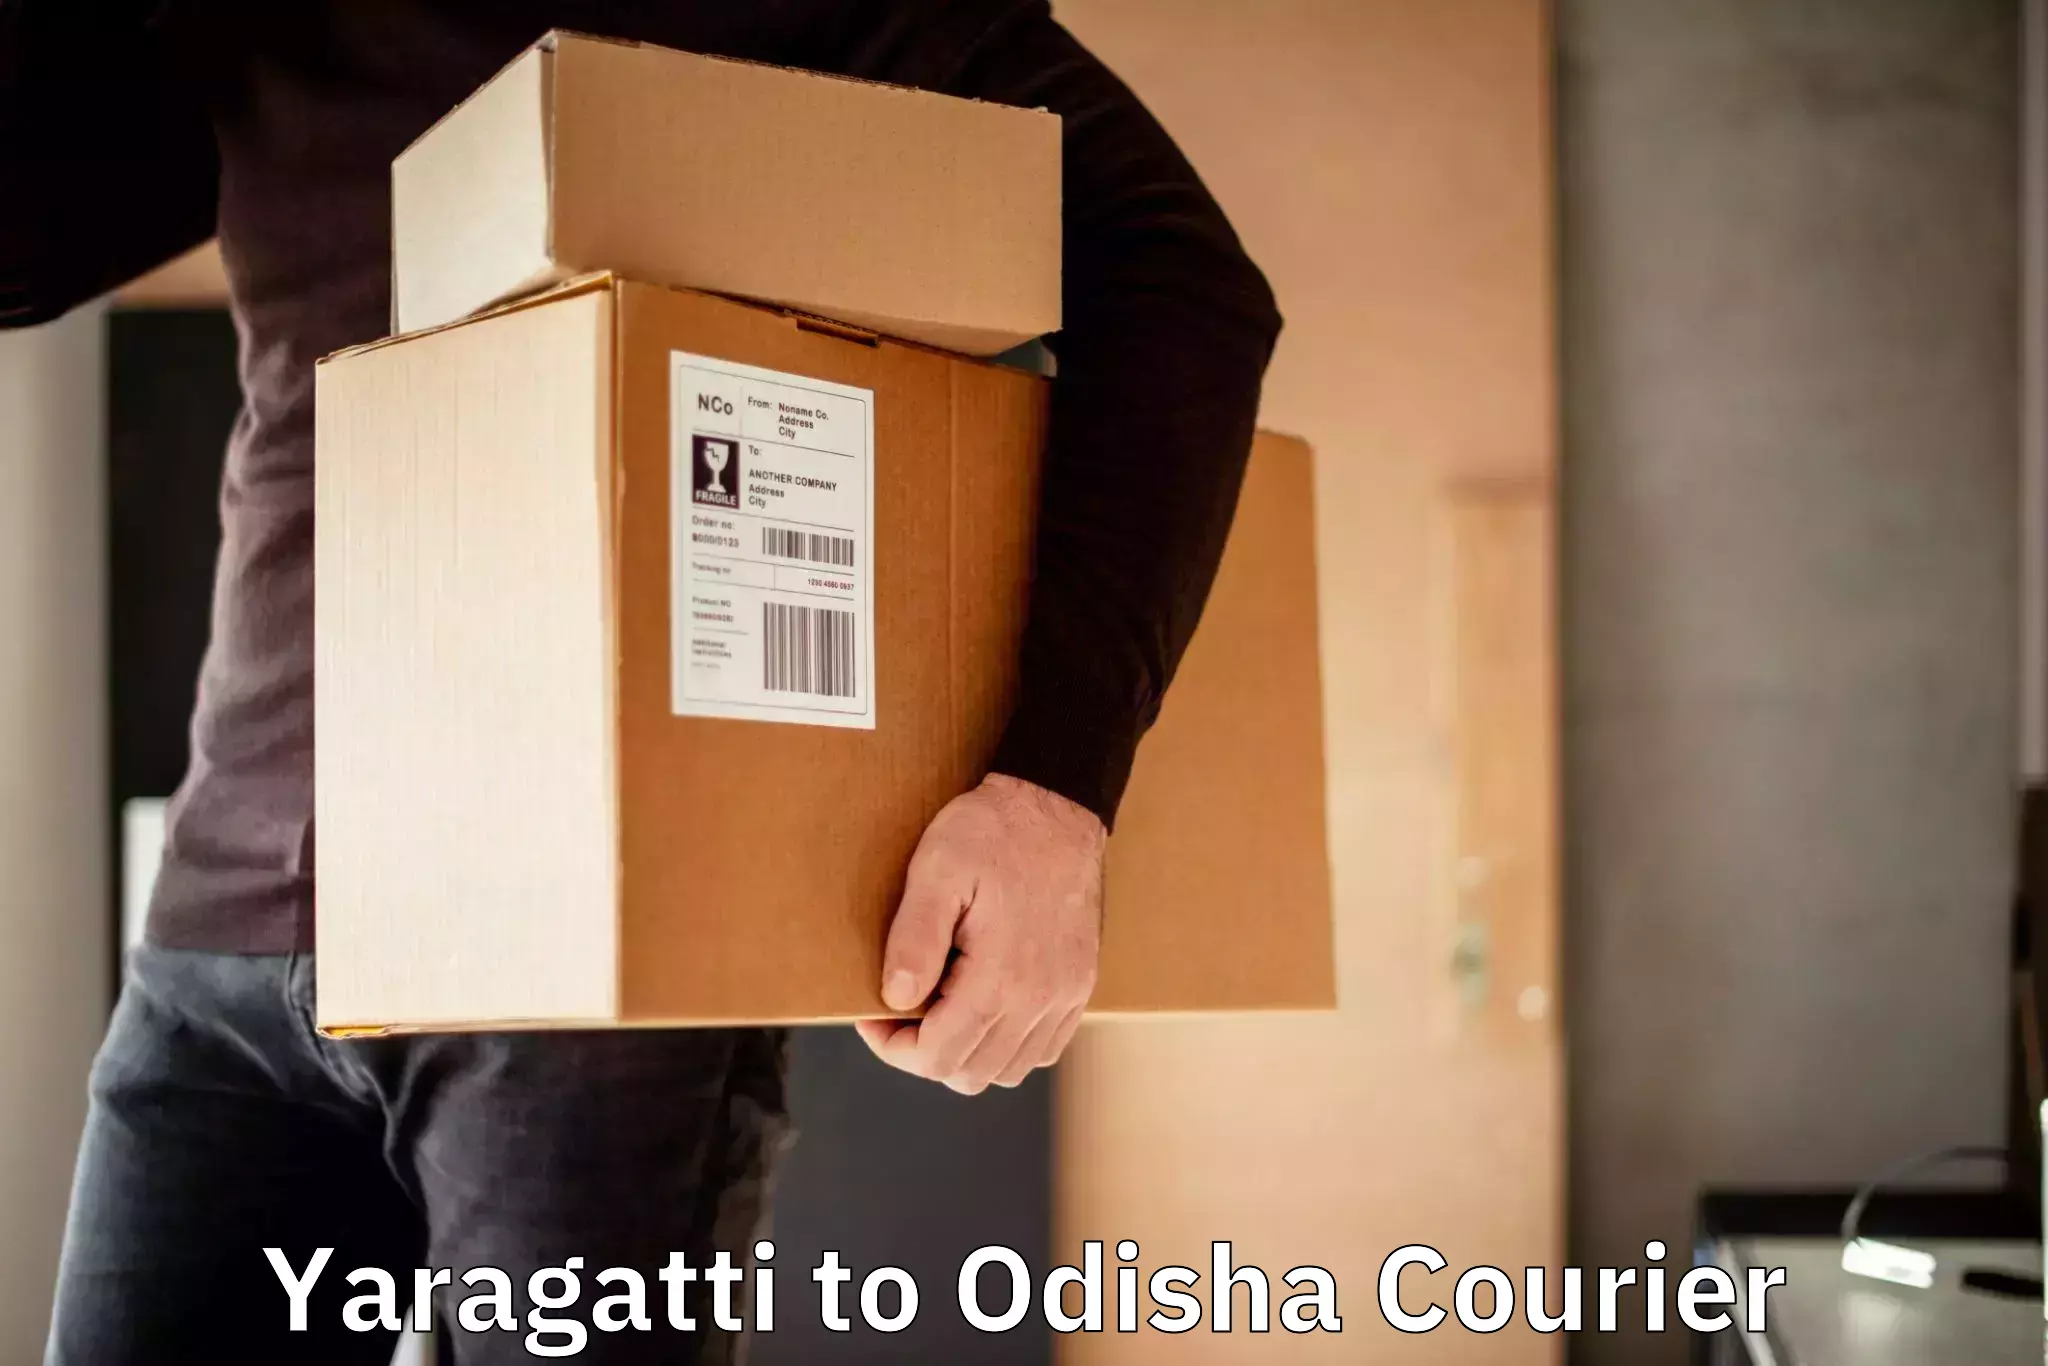 24/7 shipping services Yaragatti to Chandipur